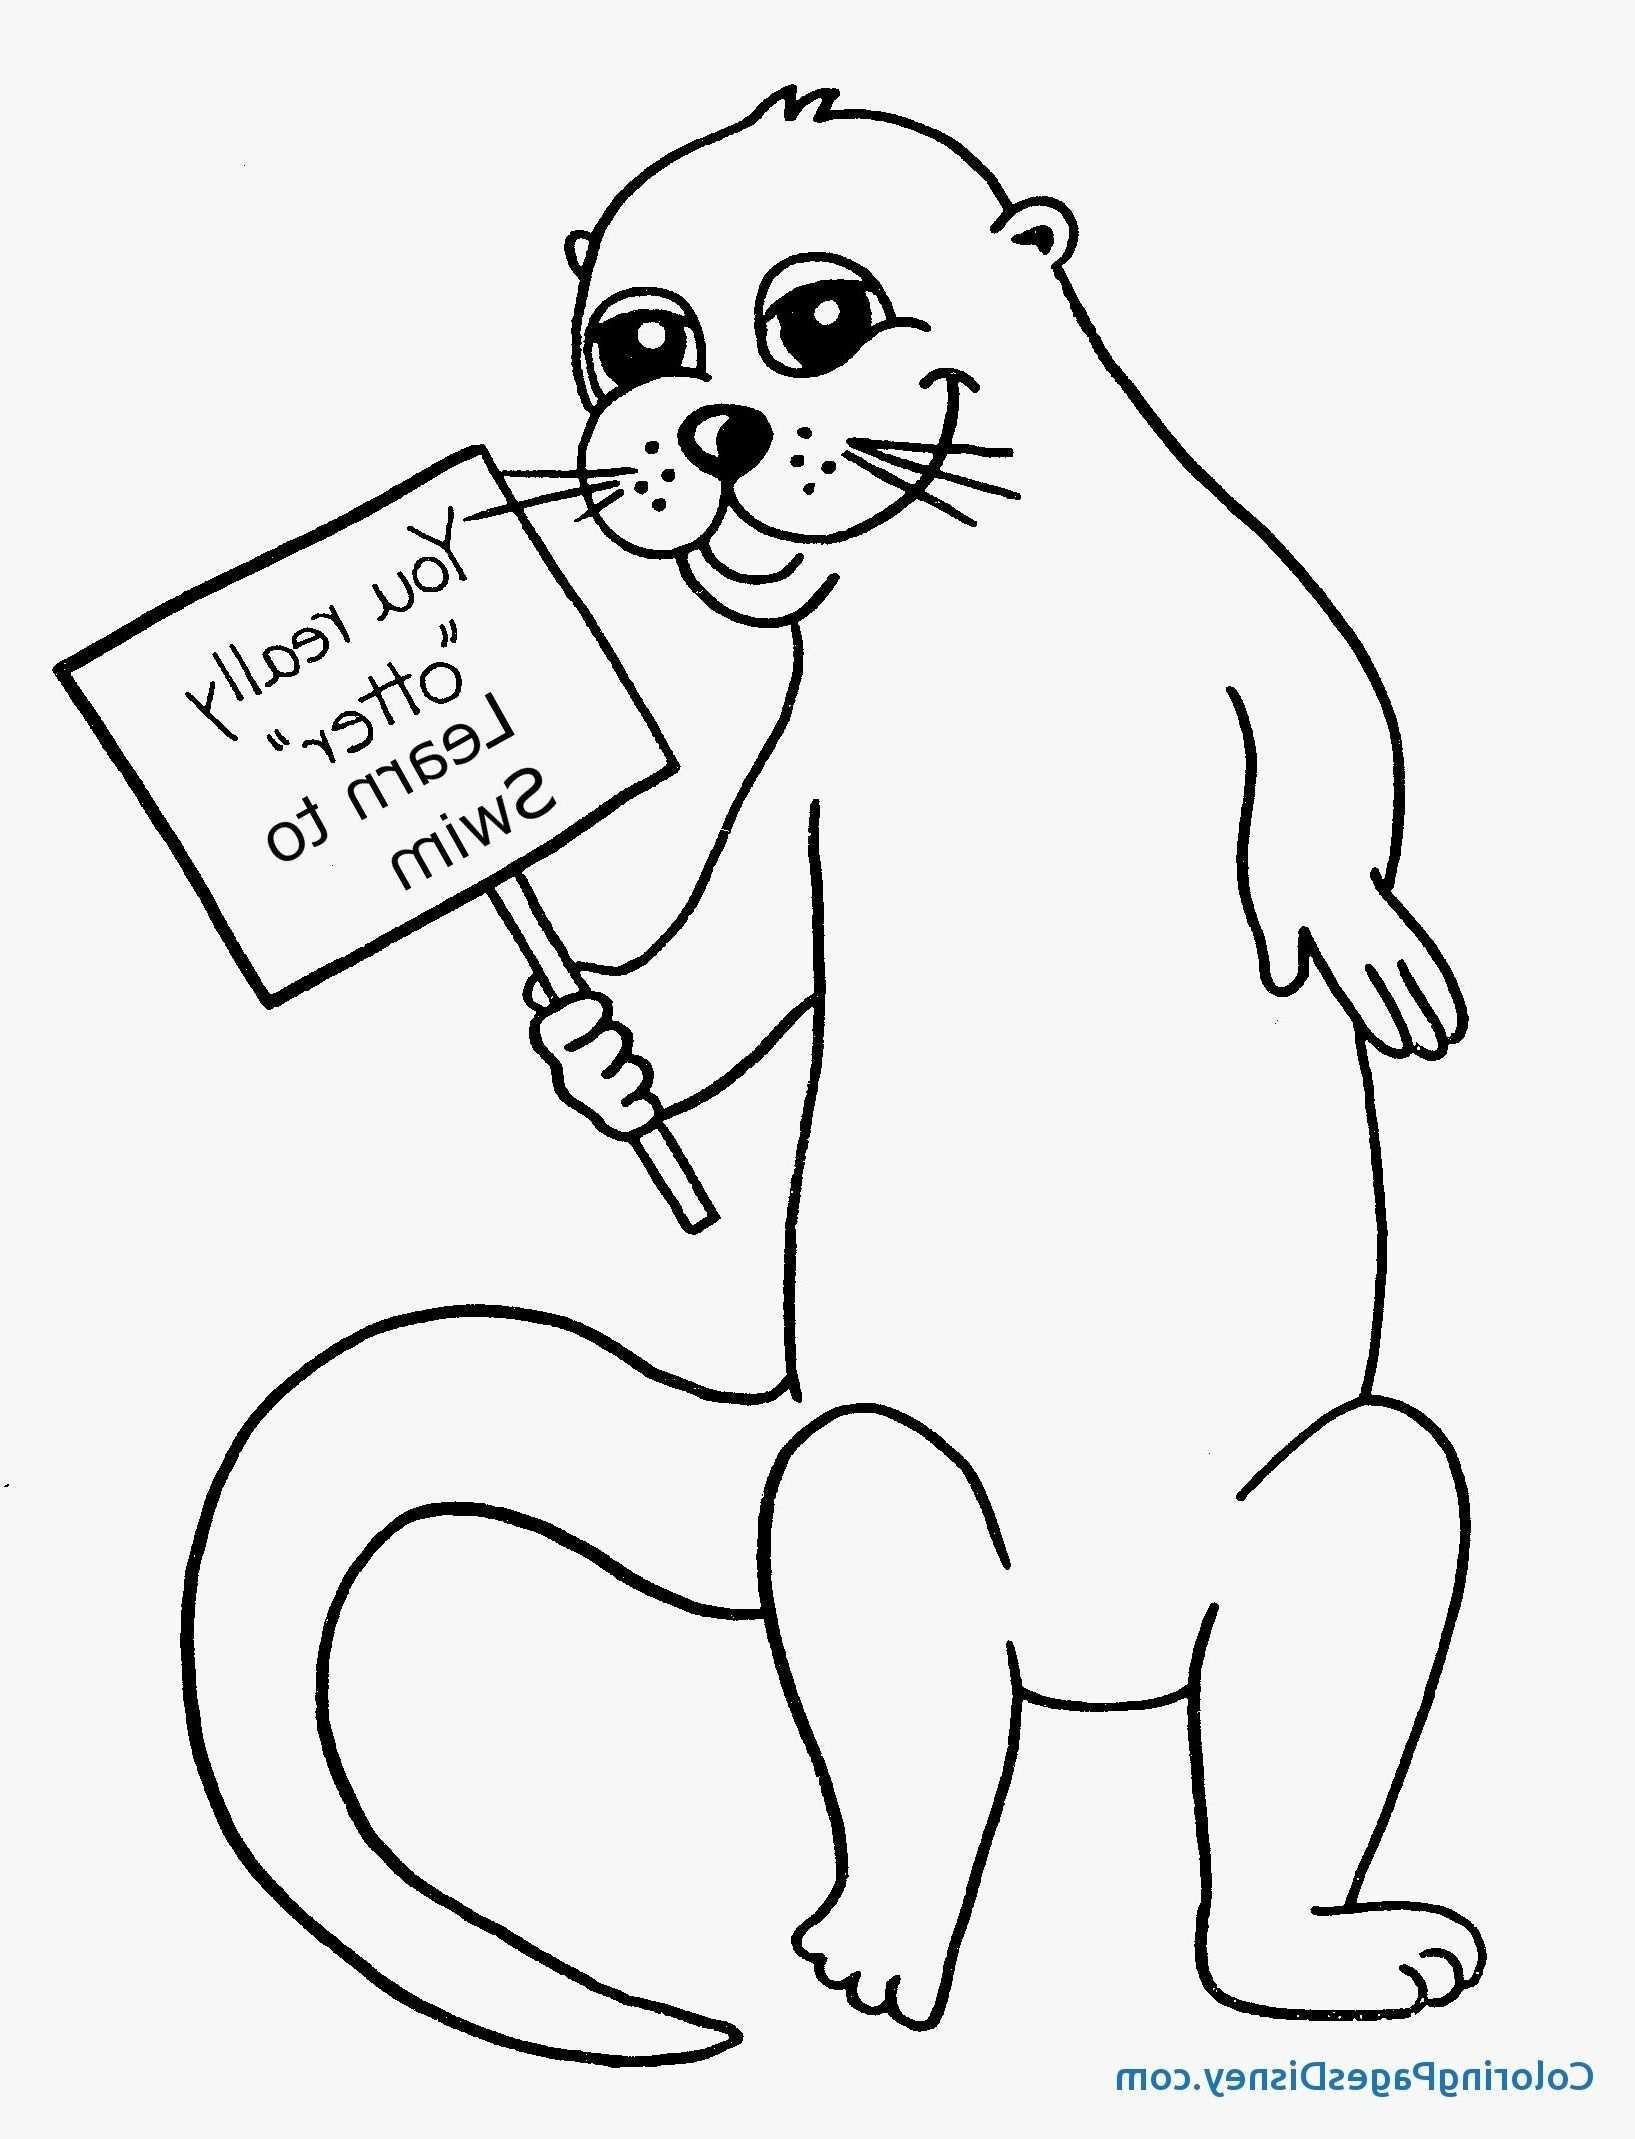 Otter Coloring Pages Sea Otter Coloring Page Dxjz Compromise Sea Otter Coloring Page Davemelillo Com Coloring Pages Inspirational Coloring Pages Moon Coloring Pages